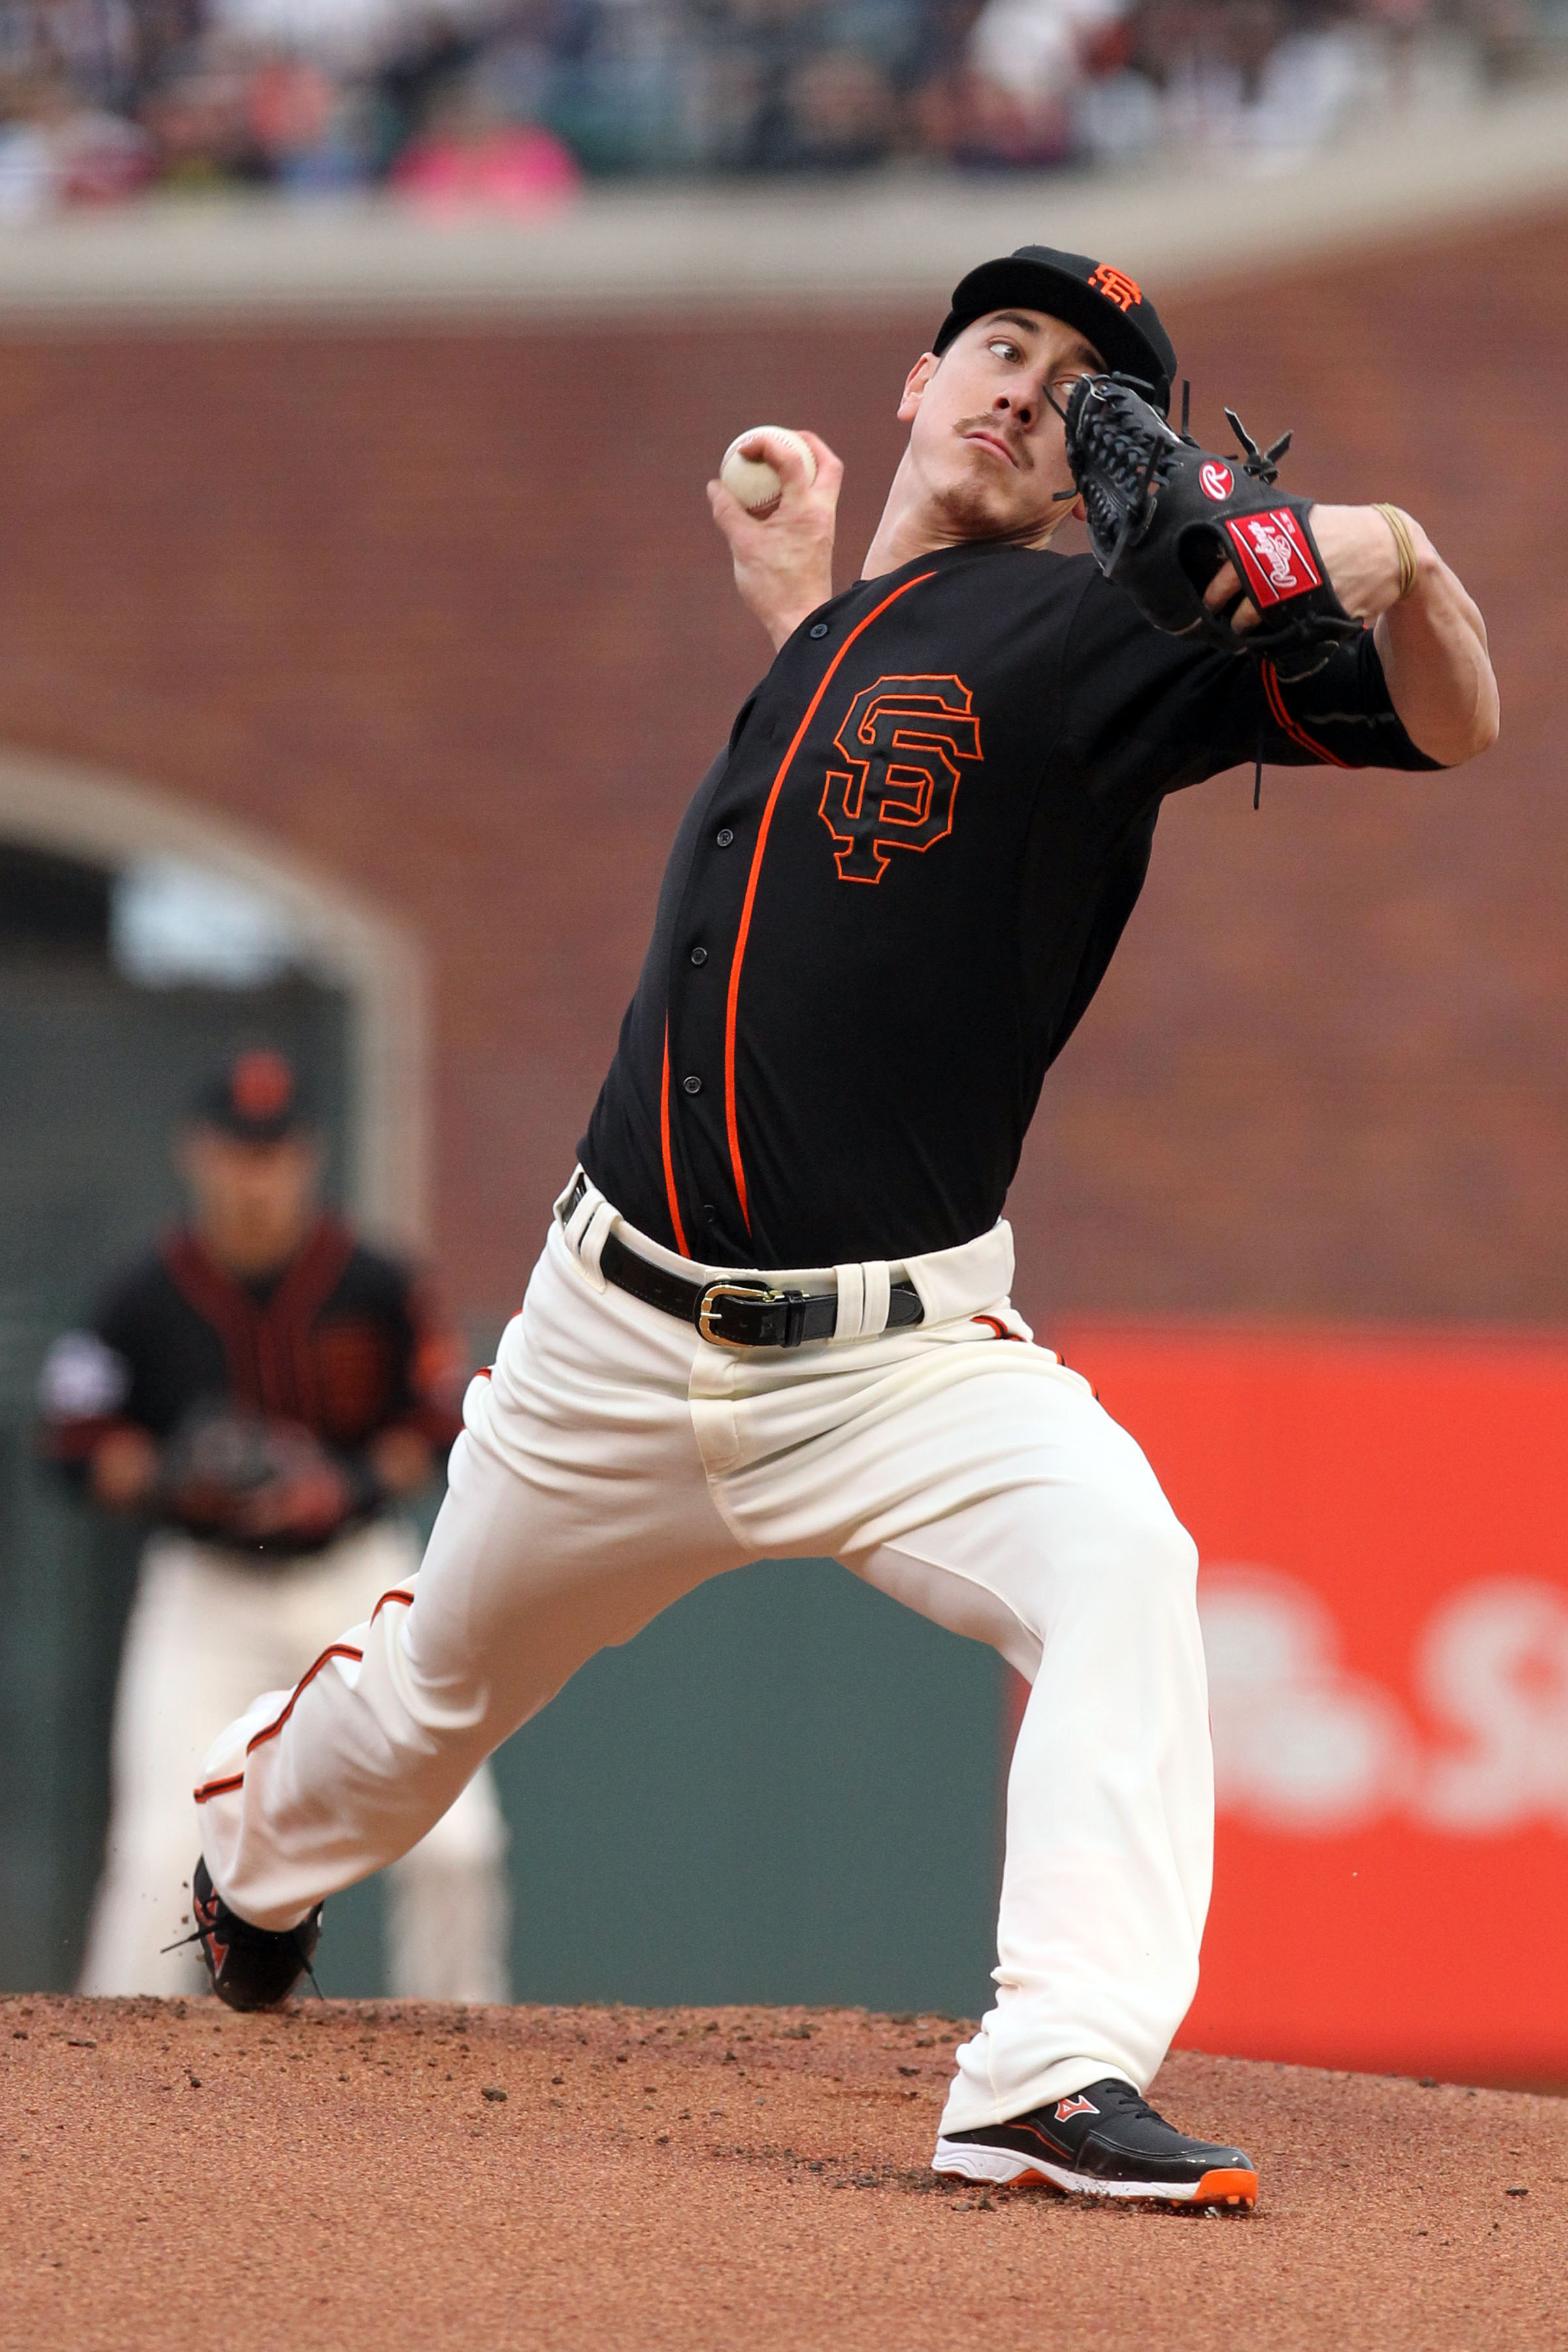 7 teams that could be a good fit for Tim Lincecum